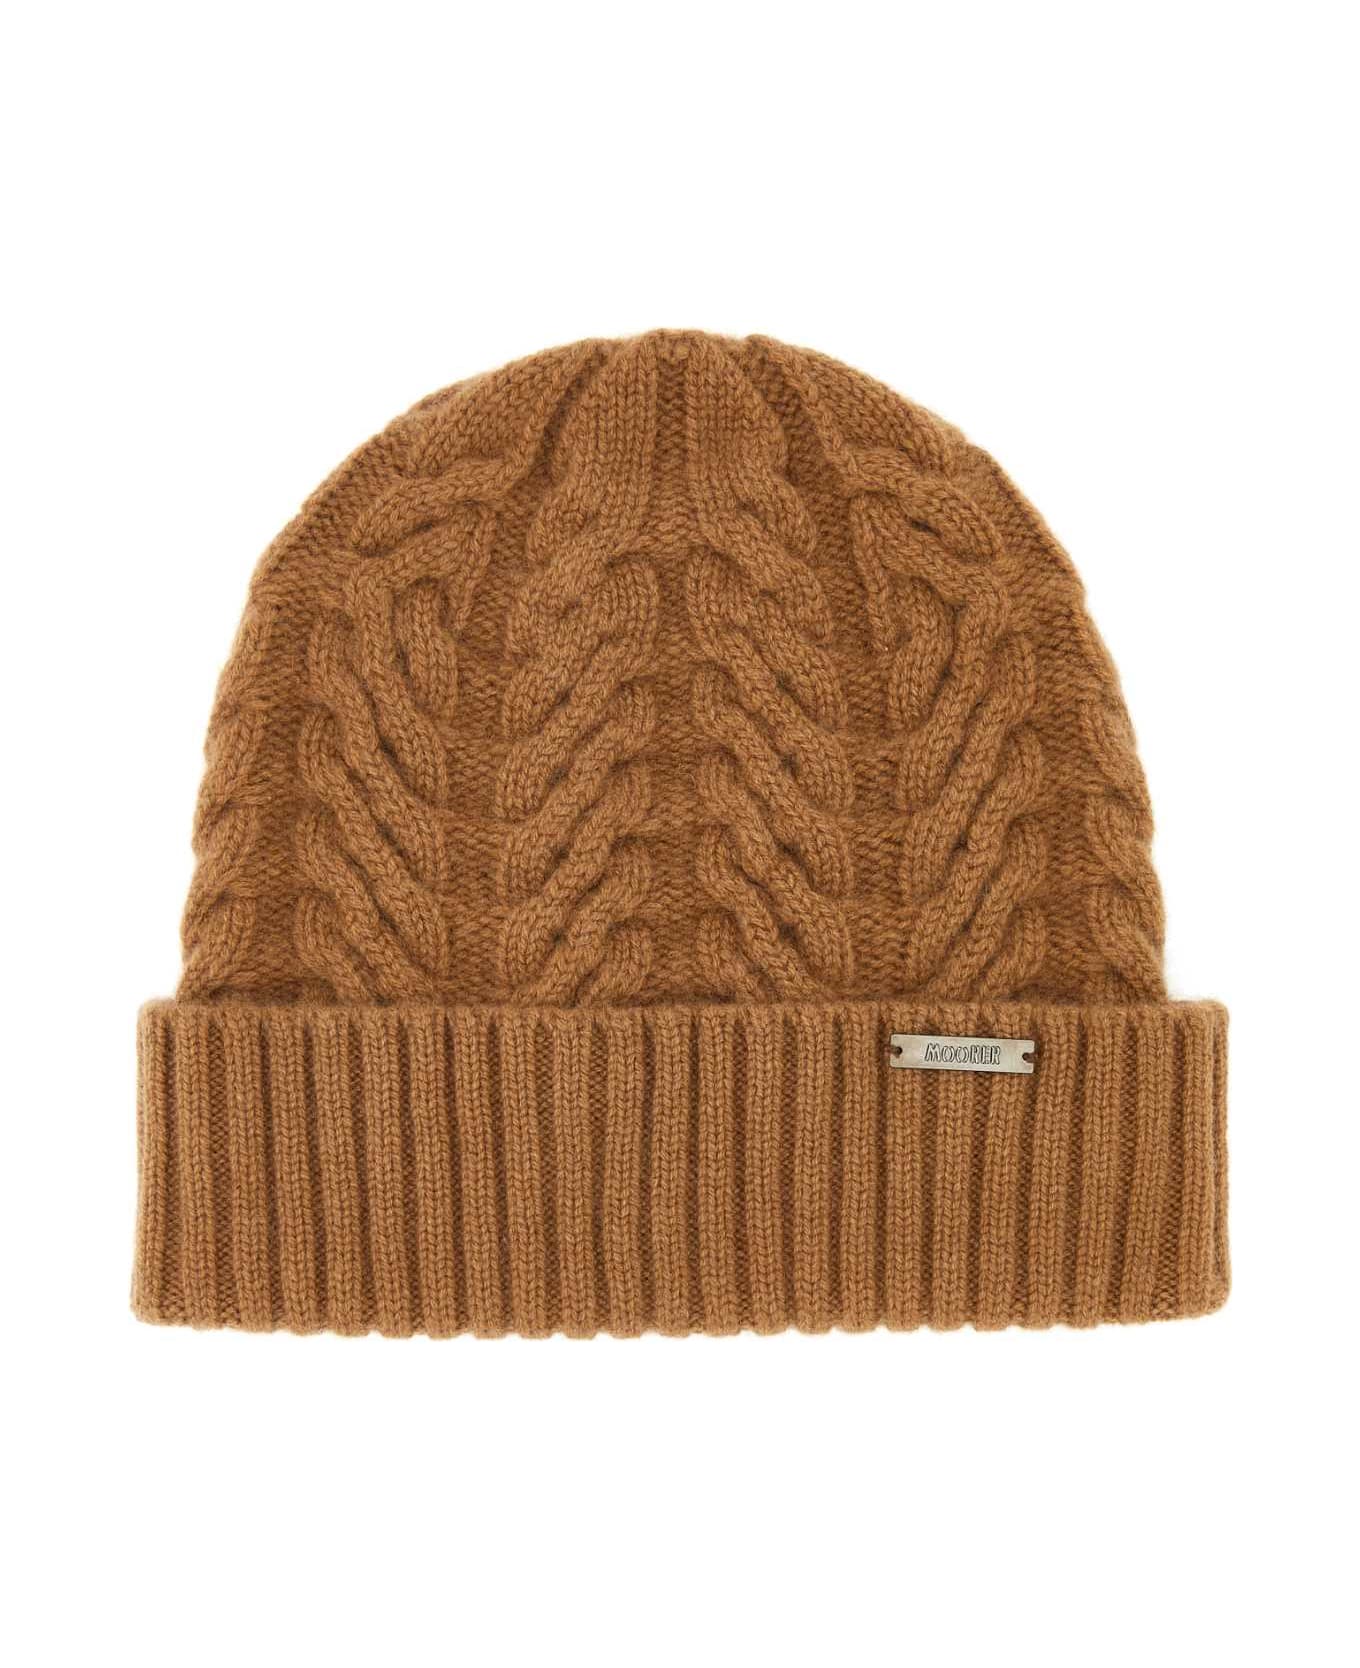 Moorer Camel Cashmere Beanie Hat - VICUNA